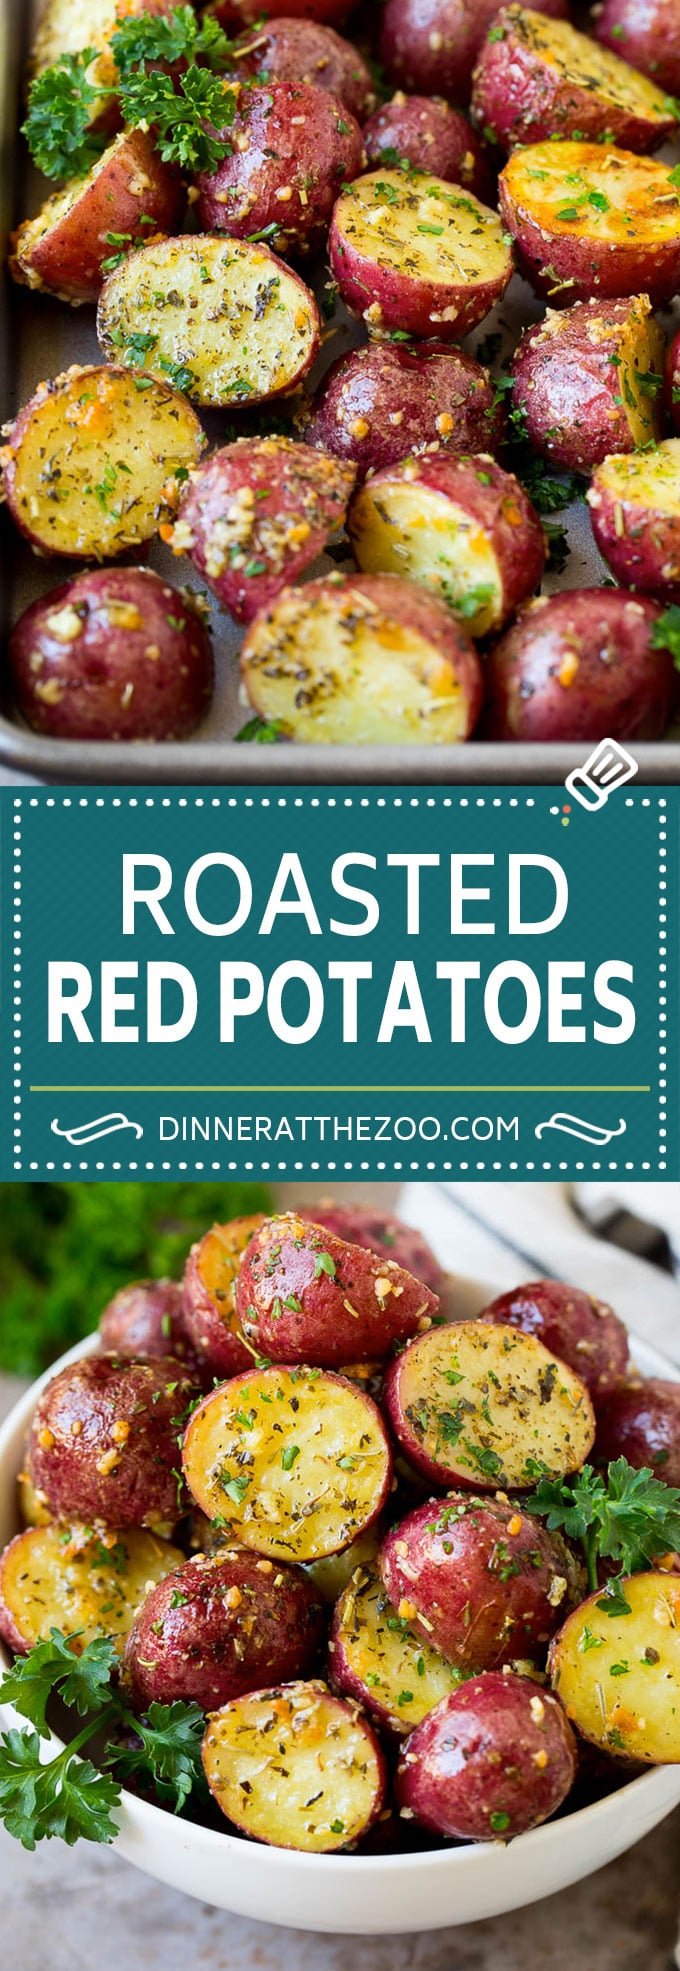 These roasted red potatoes are coated in garlic, herbs and parmesan cheese, then oven baked to golden brown perfection.